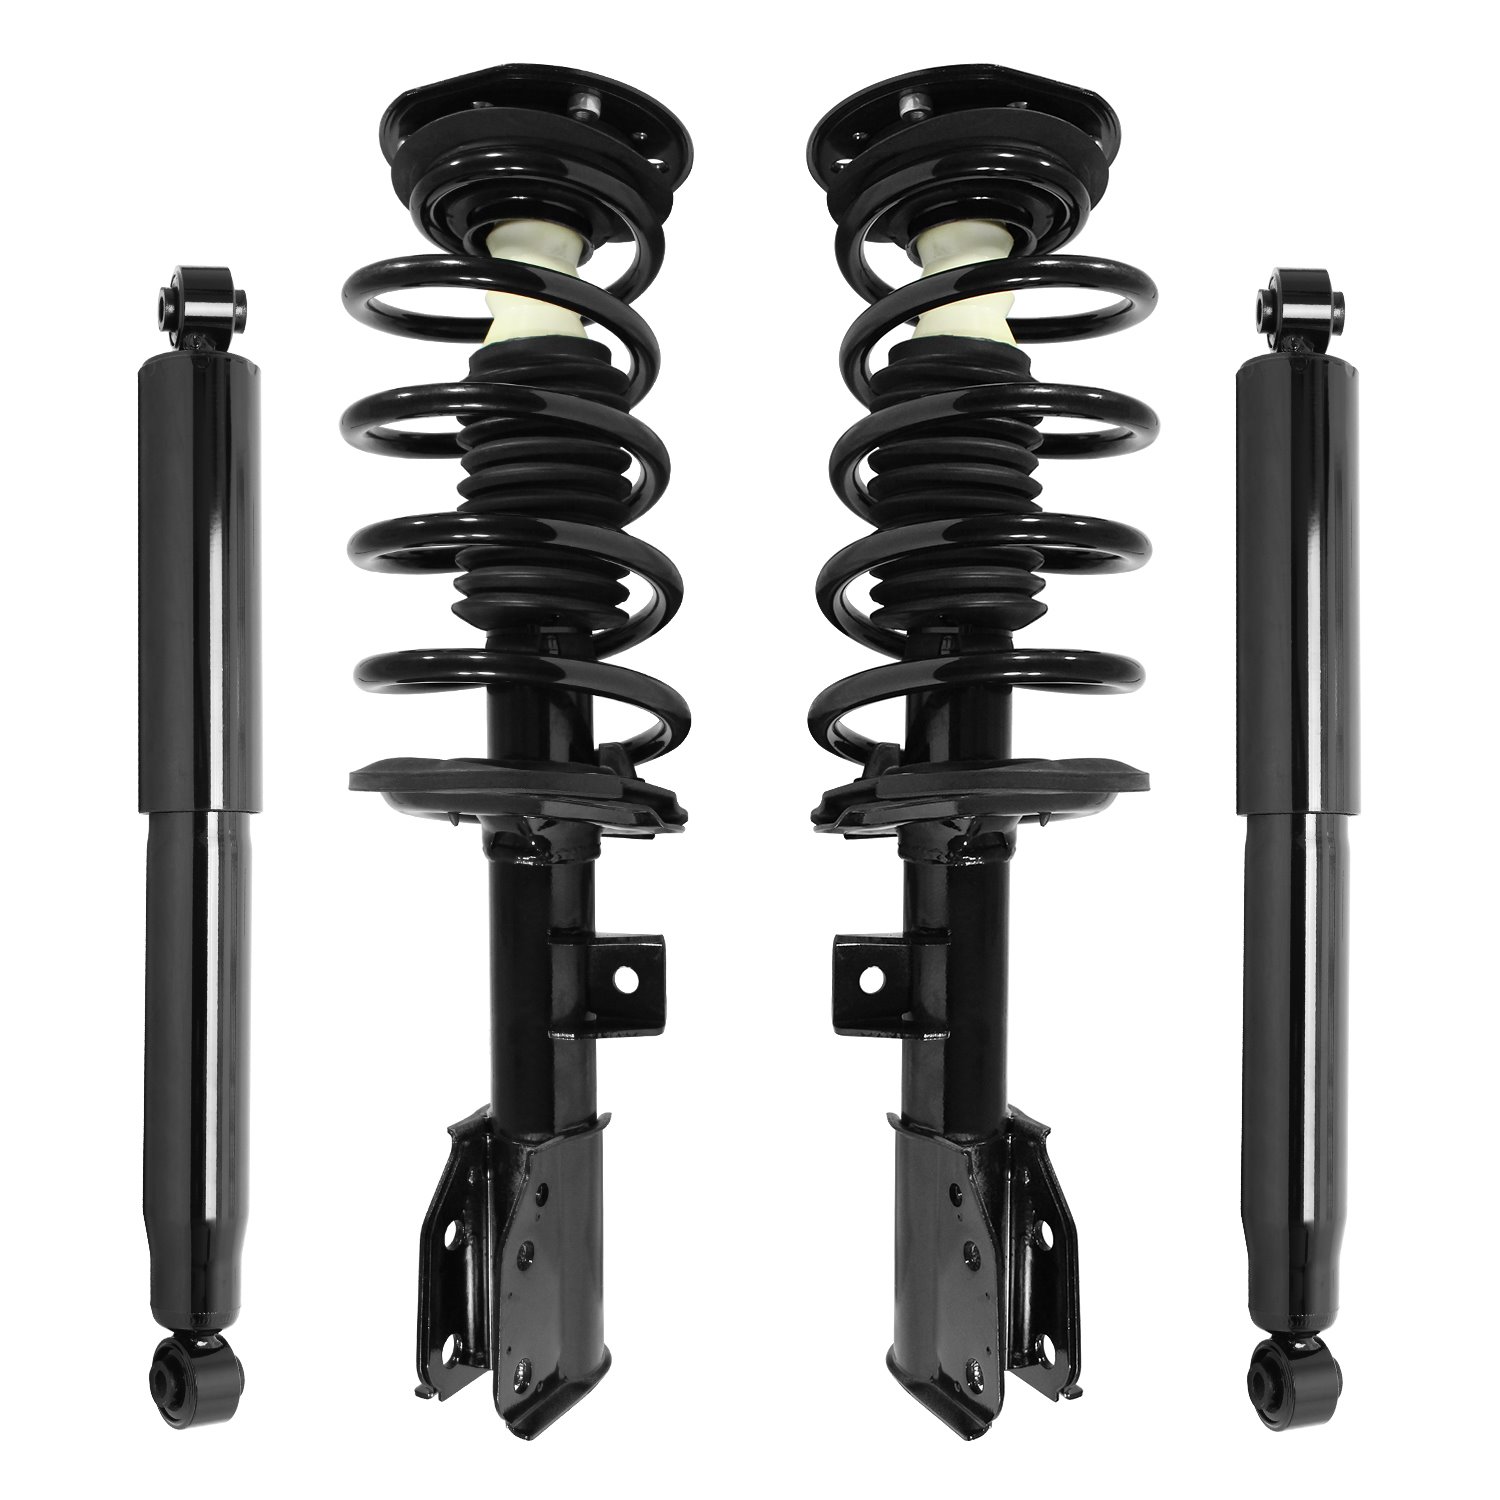 4-11463-251140-001 Front & Rear Suspension Strut & Coil Spring Assembly Fits Select GM